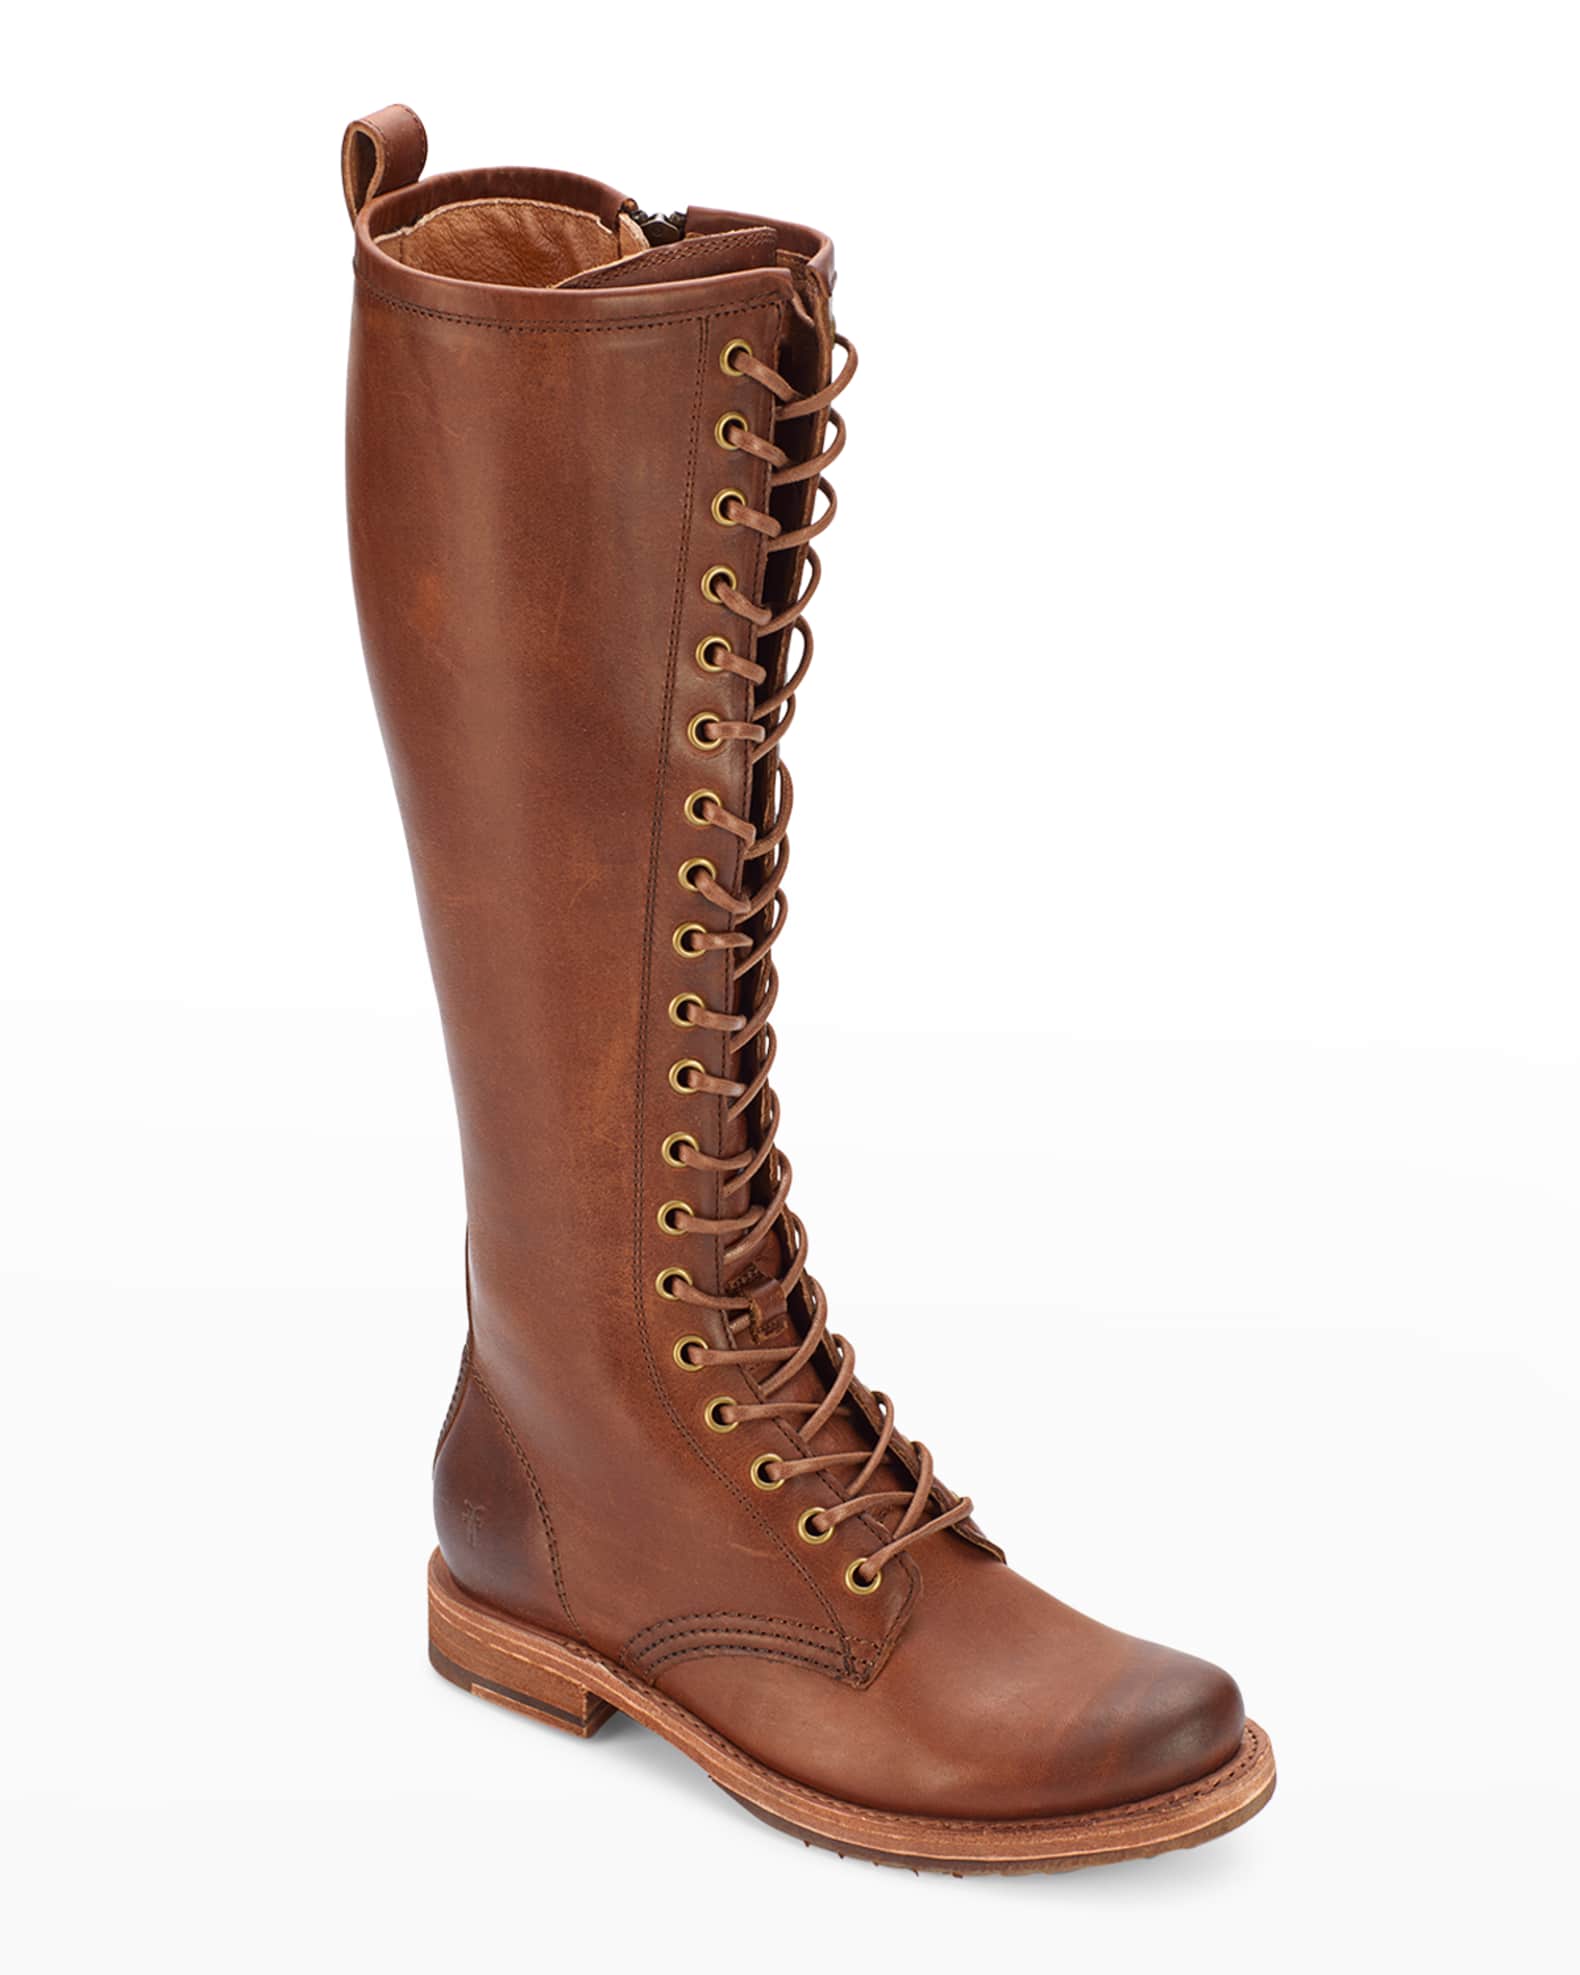 Frye Veronica Leather Tall Combat Boots | Neiman Marcus